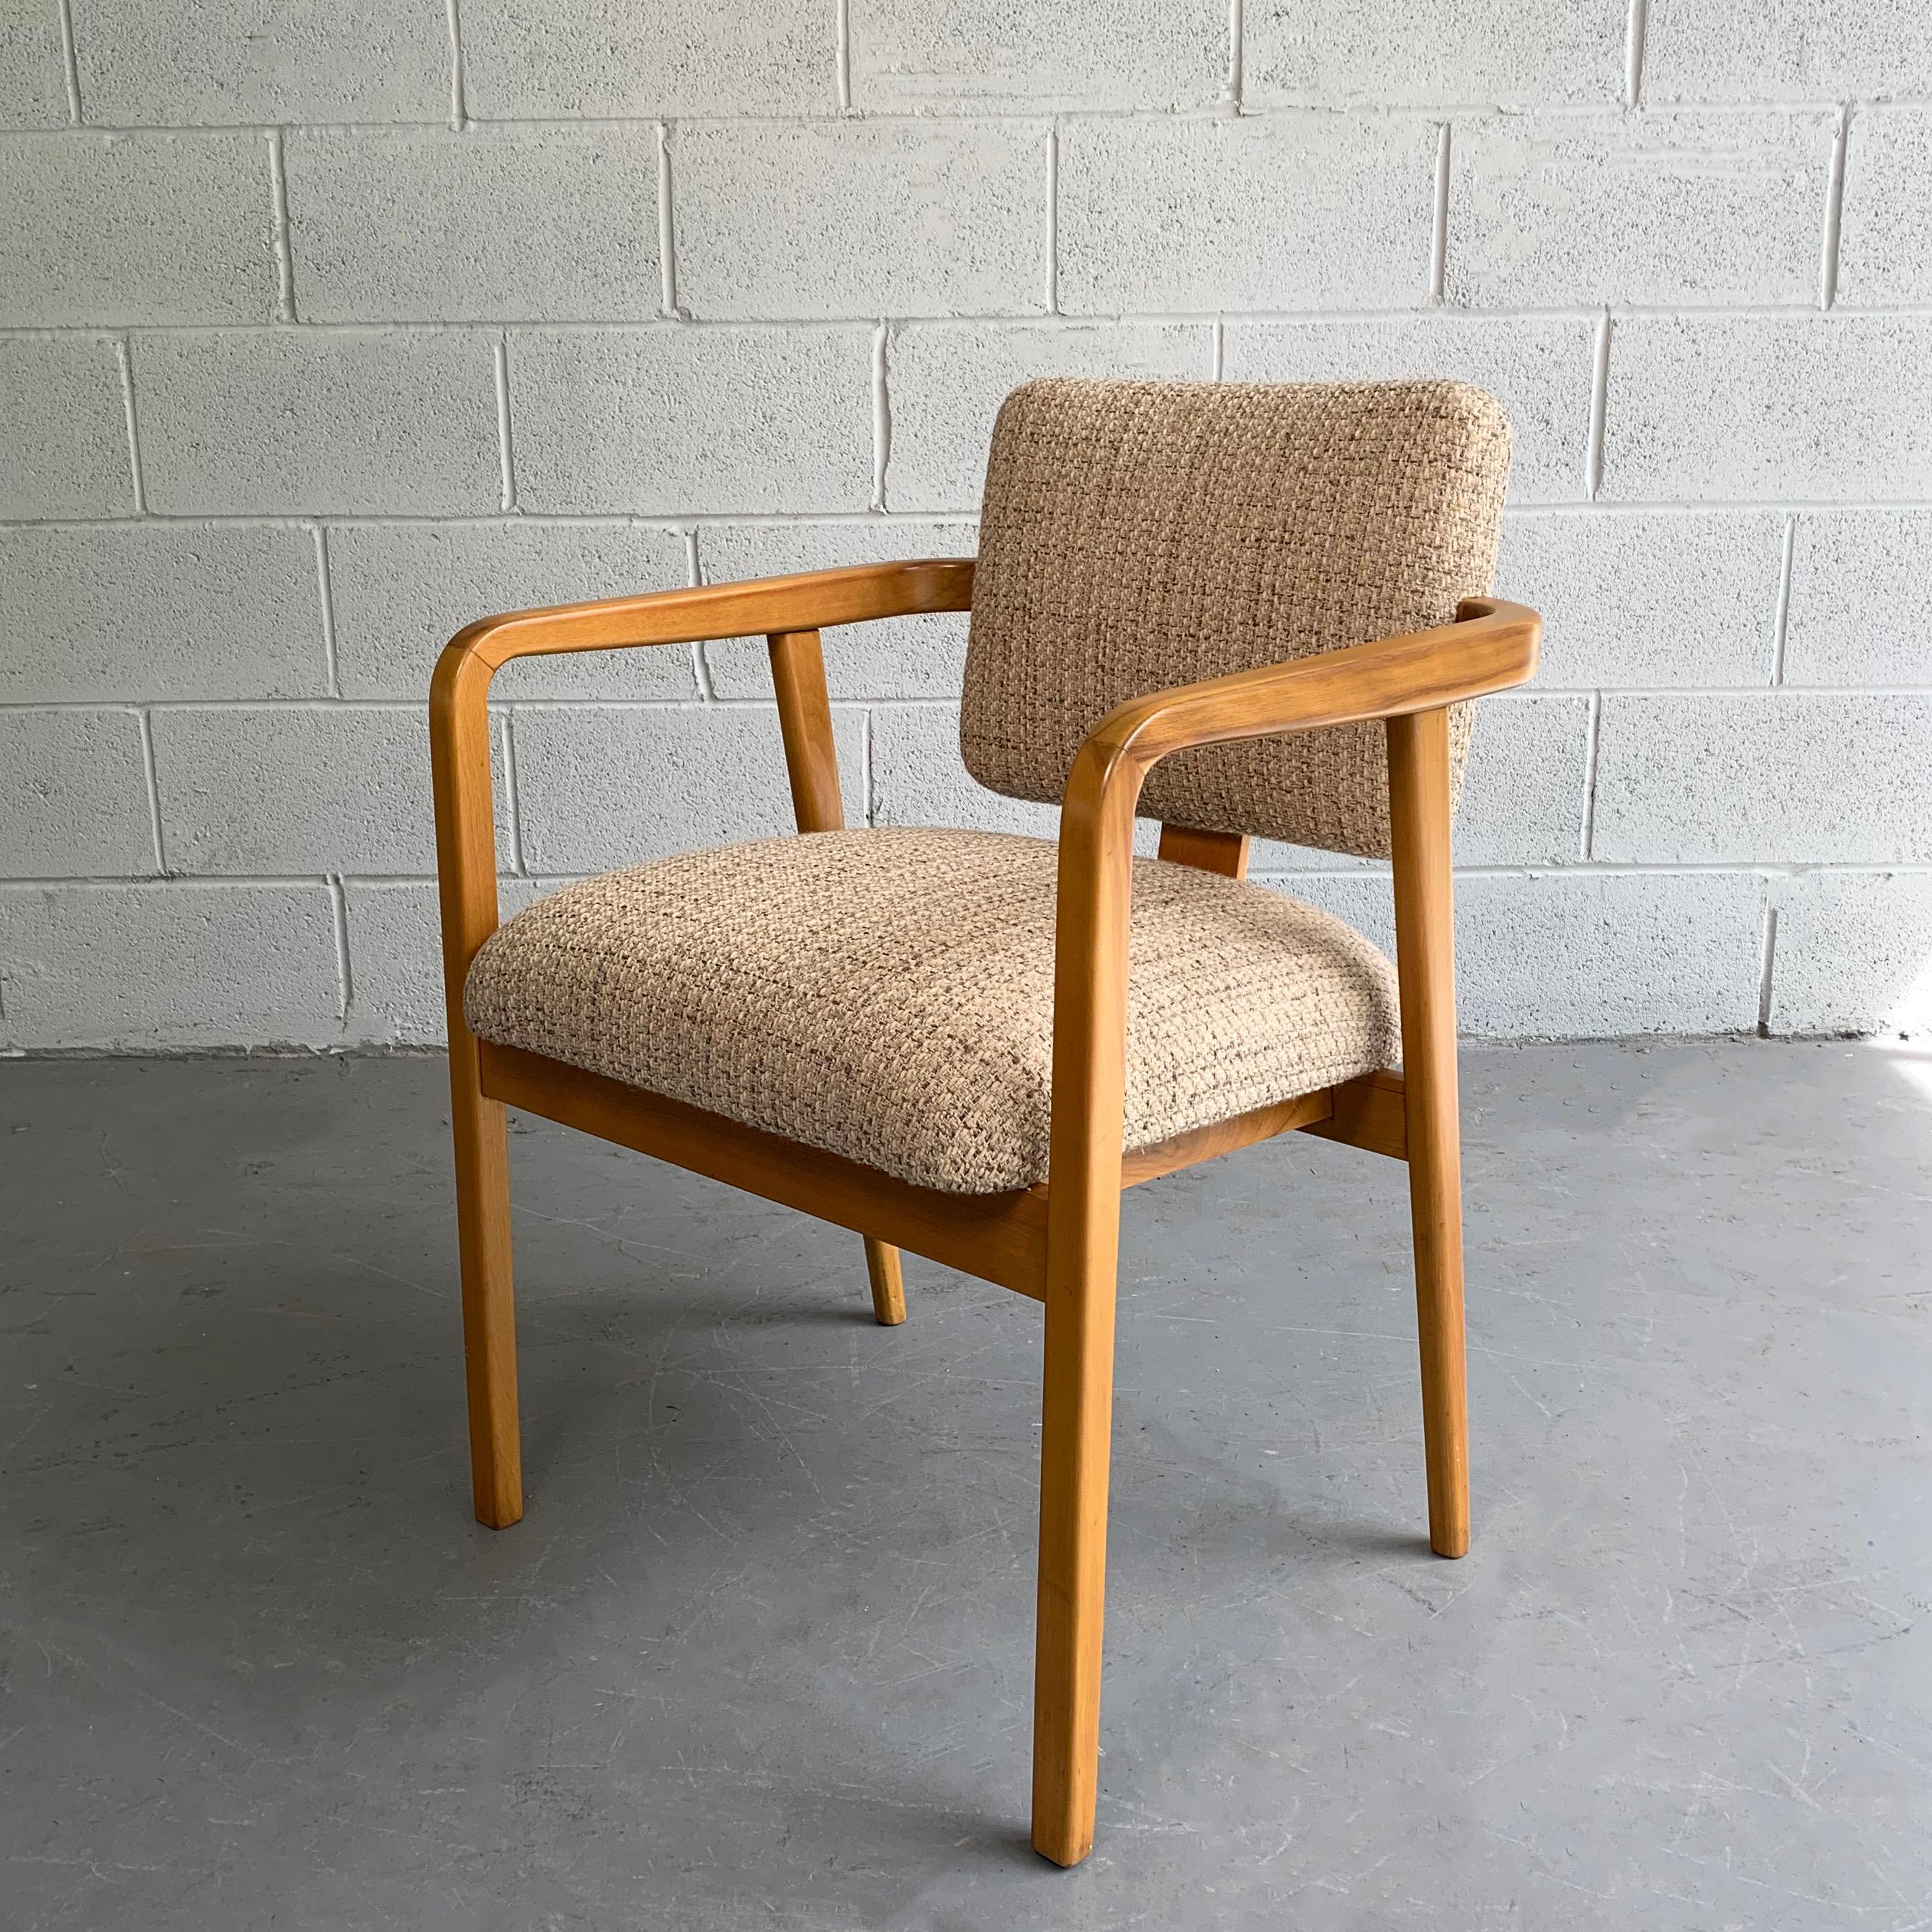 Mid-Century Modern armchair by George Nelson for Herman Miller features a maple frame with upholstered seat and back.